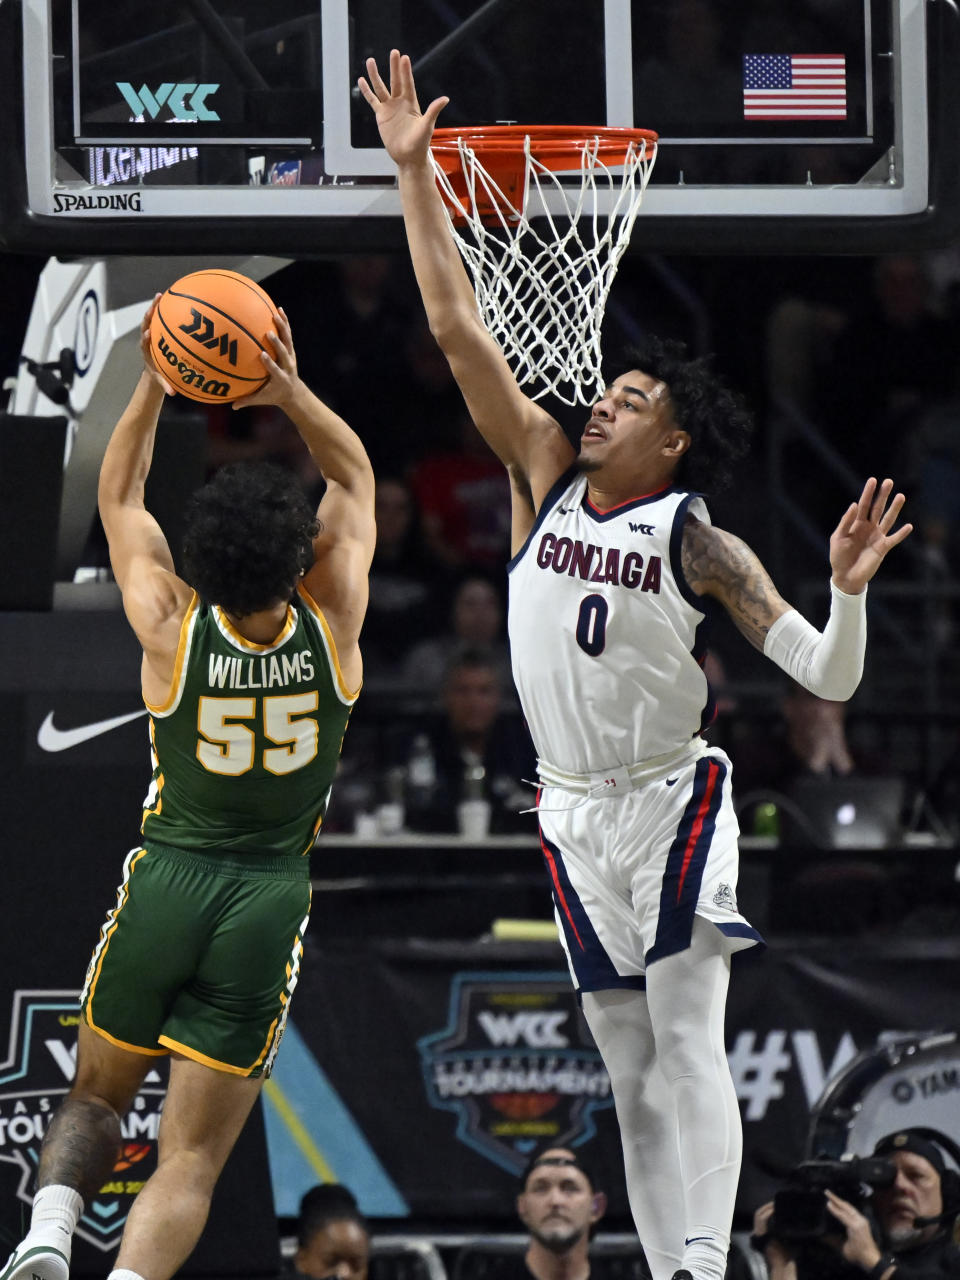 San Francisco guard Marcus Williams (55) shoots against Gonzaga guard Julian Strawther (0) during the second half of an NCAA college basketball game in the semifinals of the West Coast Conference men's tournament Monday, March 6, 2023, in Las Vegas. (AP Photo/David Becker)